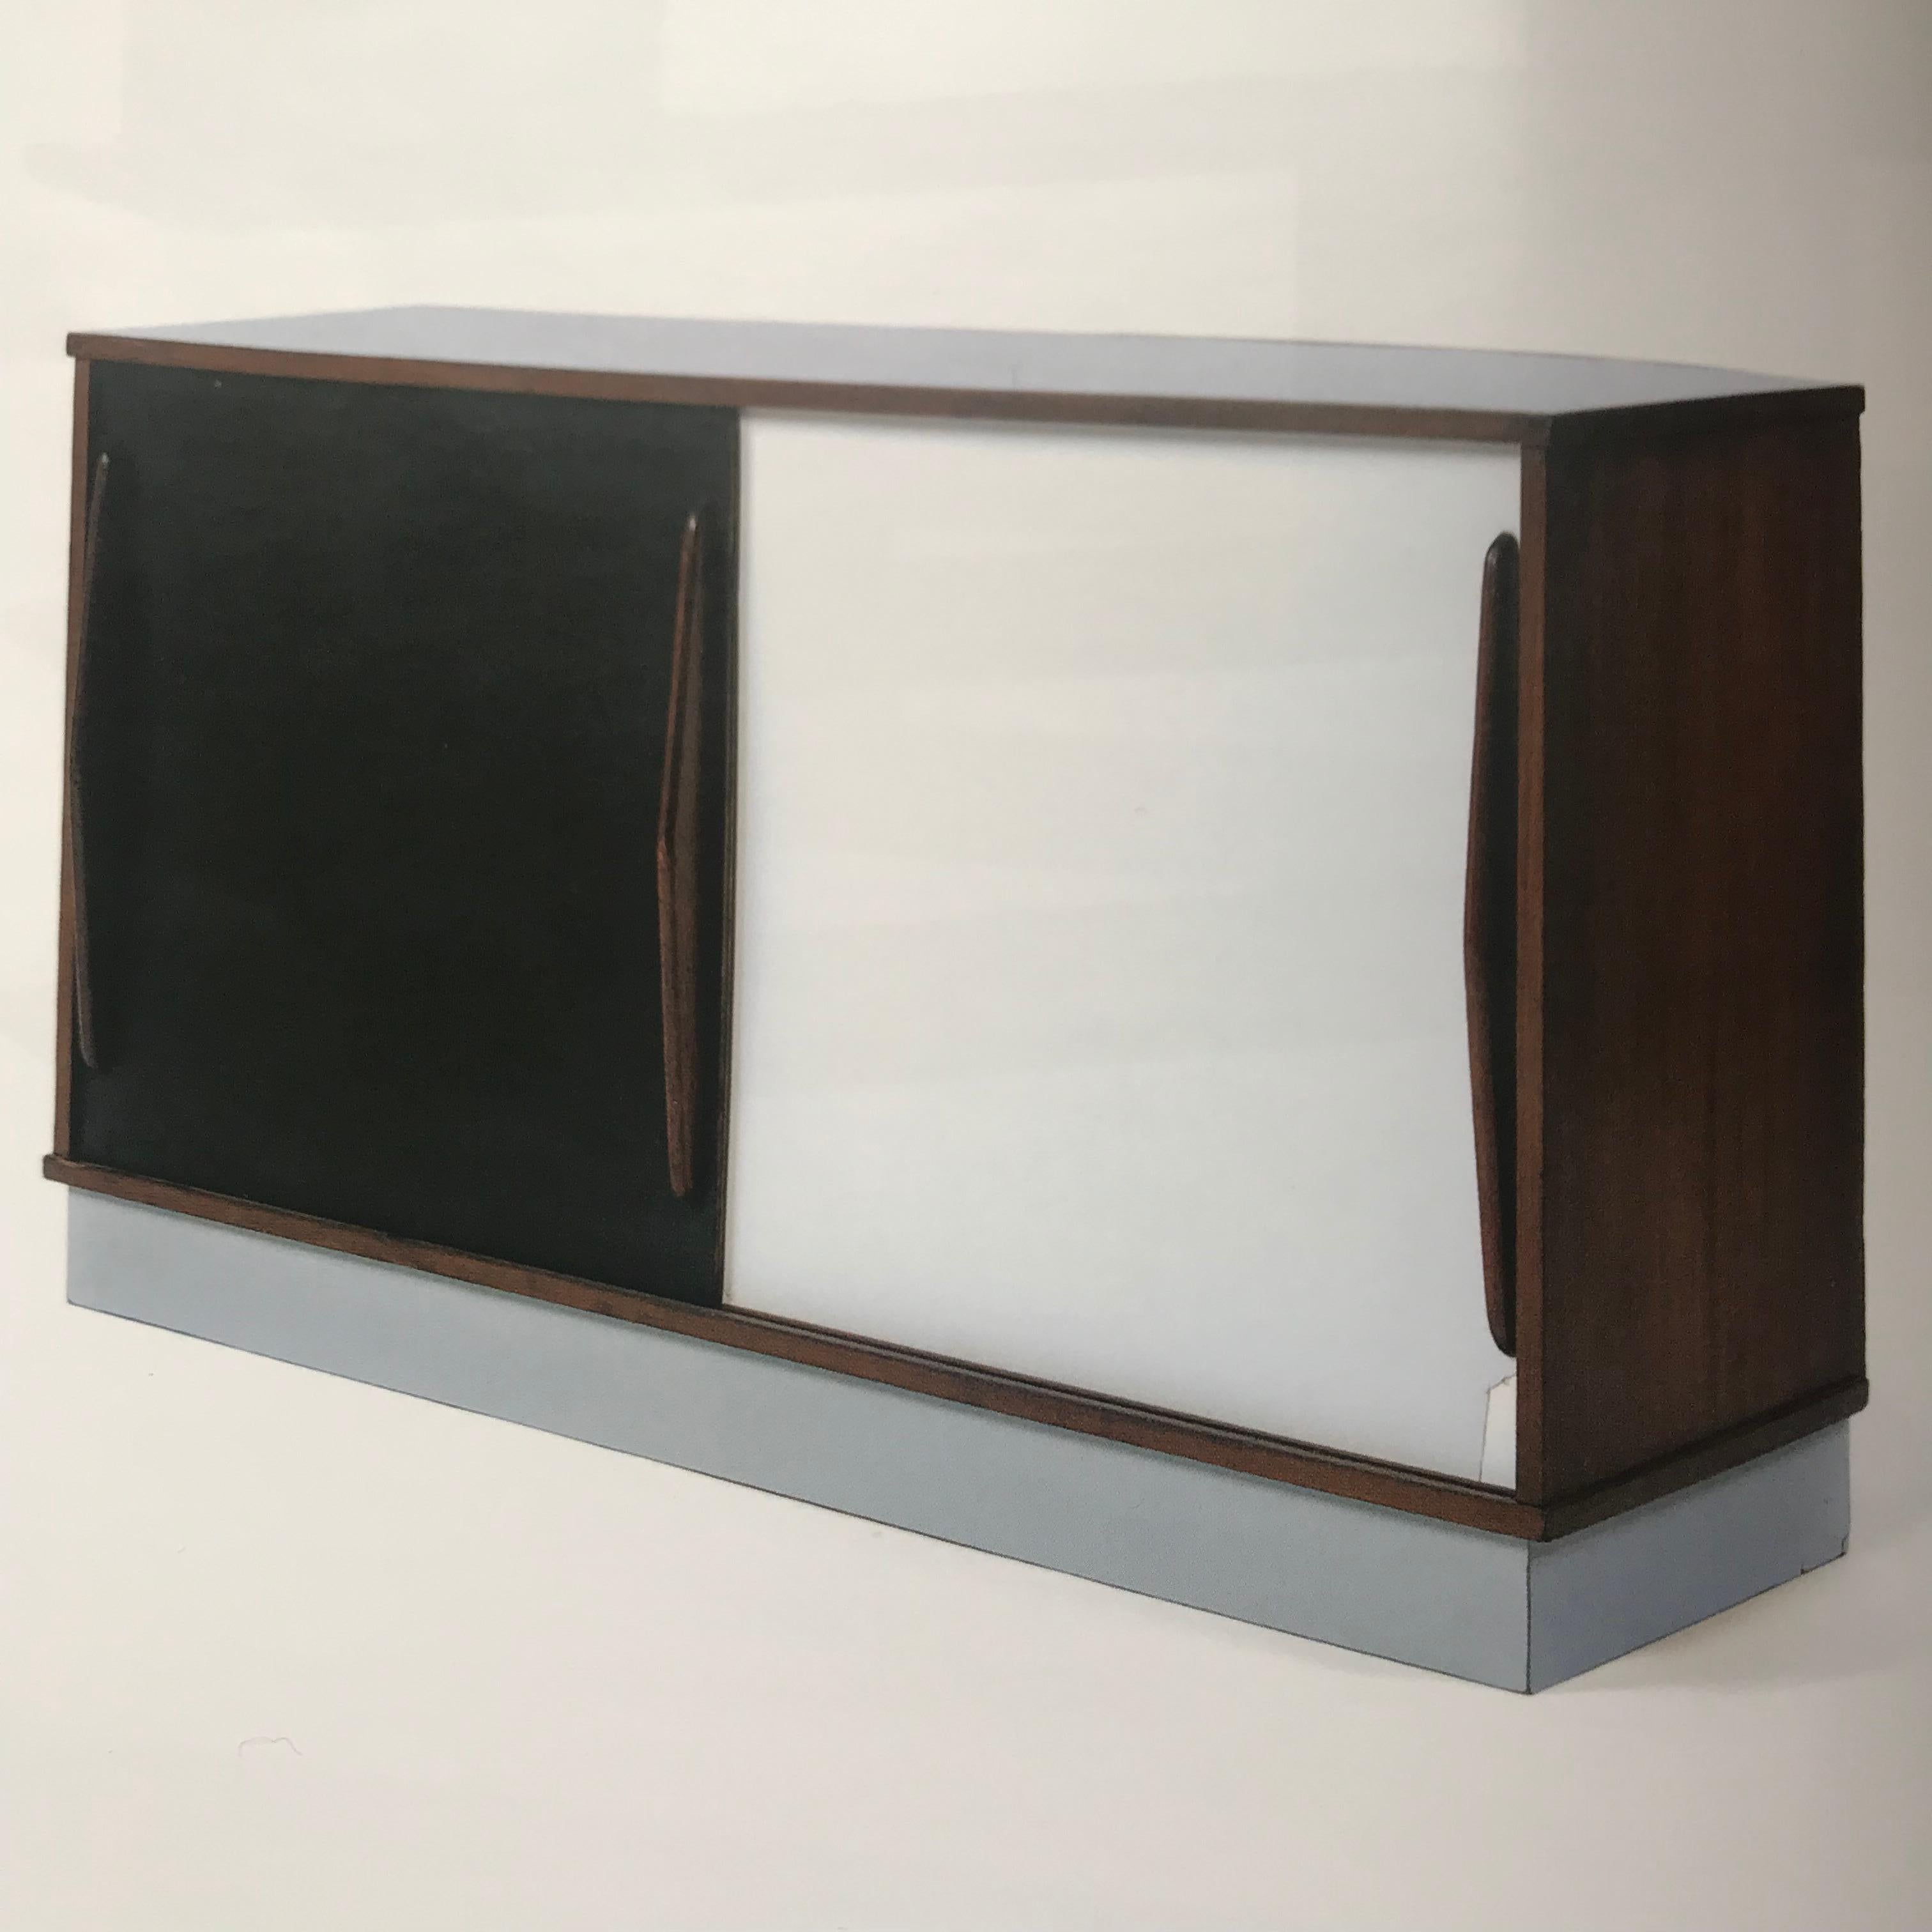 Charlotte Perriand
Cansado buffet in mahogany and melamine,
circa 1958
Edited by Steph Simon
Measures: H 80 x W 141 x D 40
Very good state
12900 Euros.